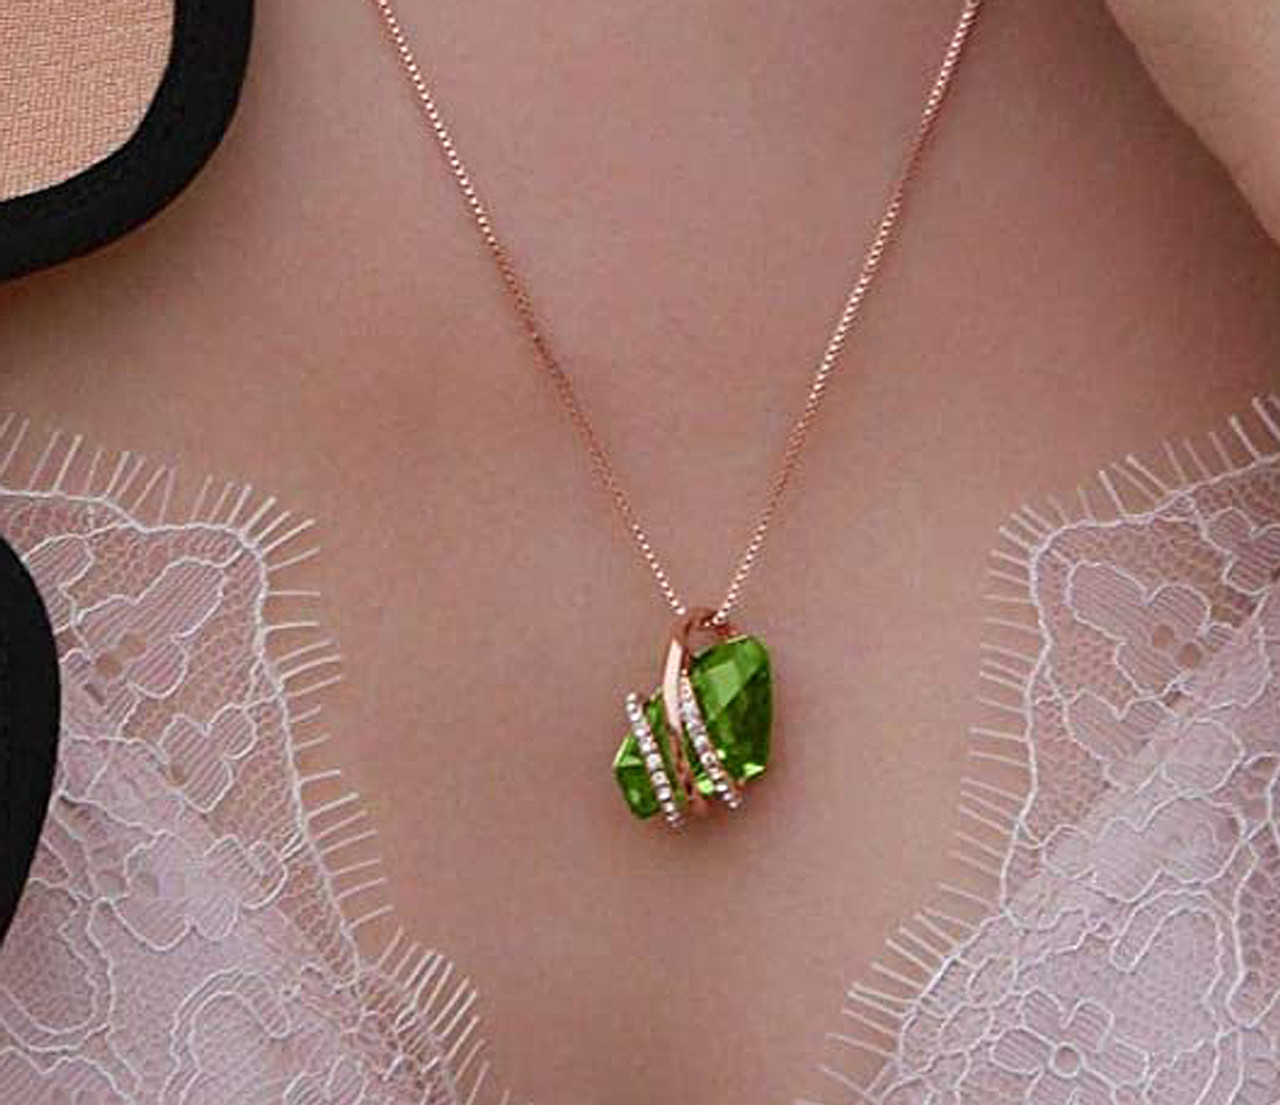 August Birthstone - Peridot Light Green Crystal Rock Pendant and CZ stones - with 18" Rose Gold Chain Necklace. Gift for Lover, Girl Friend, Wife, Valentine's Day Gift, Mother's Day, Anniversary Gift Crystal Necklace.